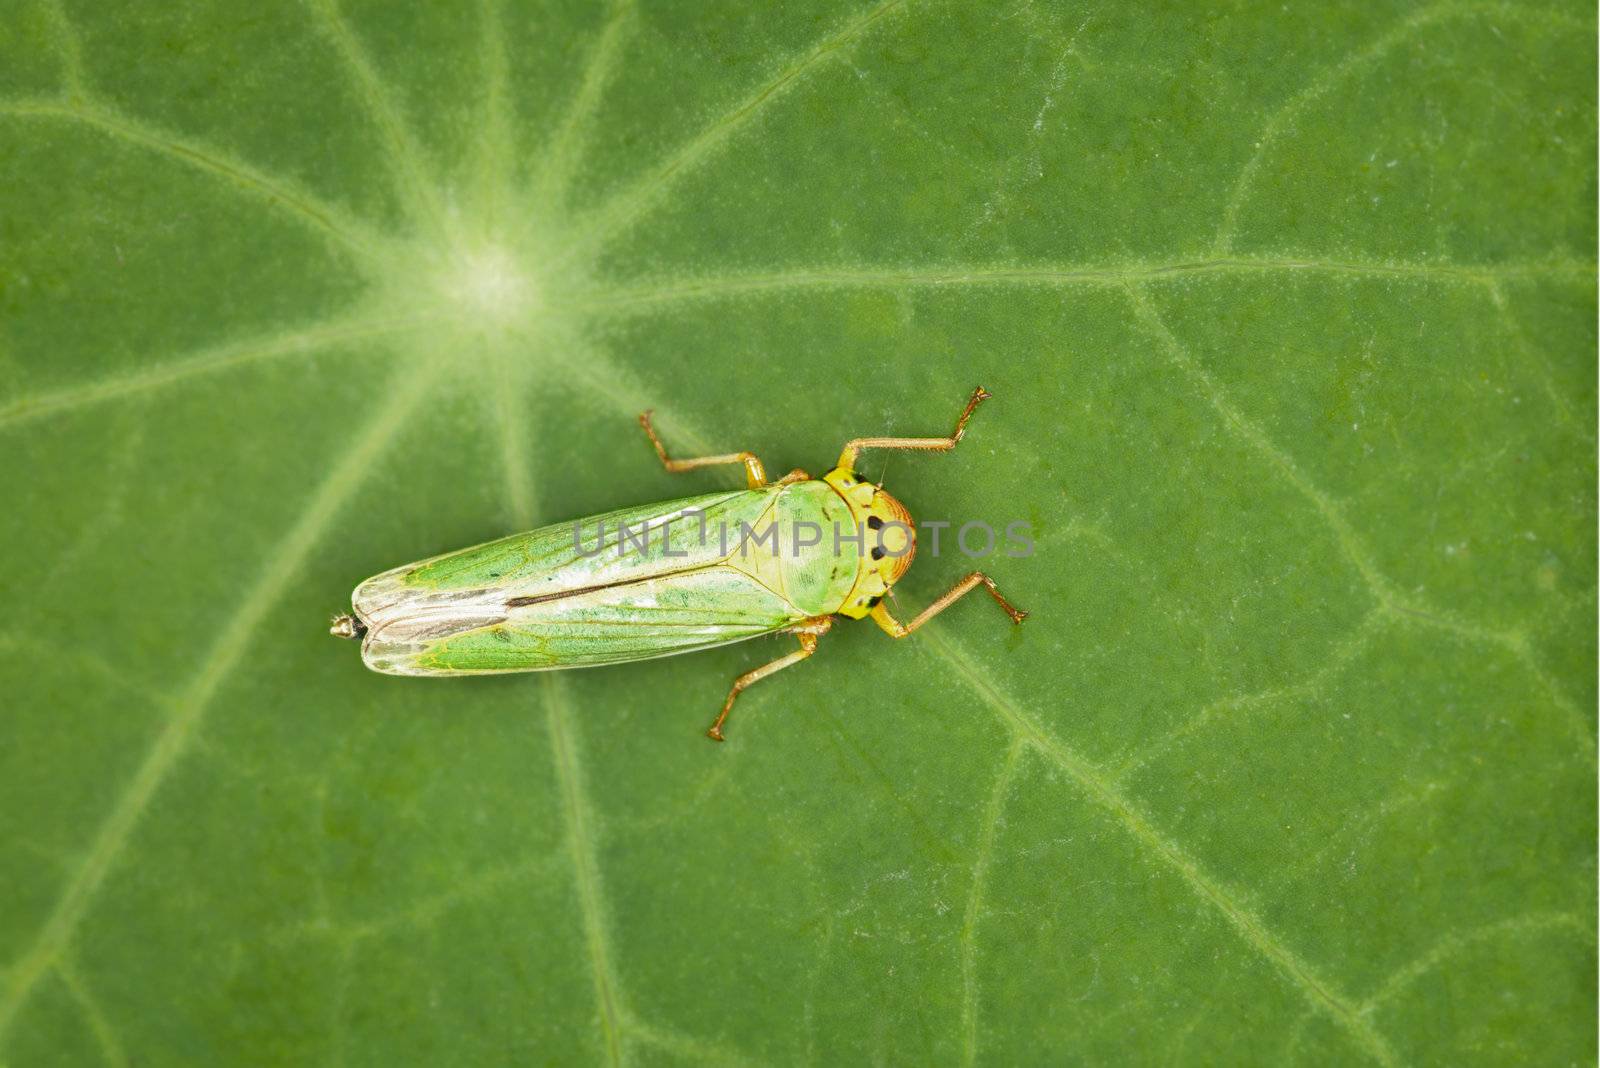 Leafhopper - small green insect on a plant leaf